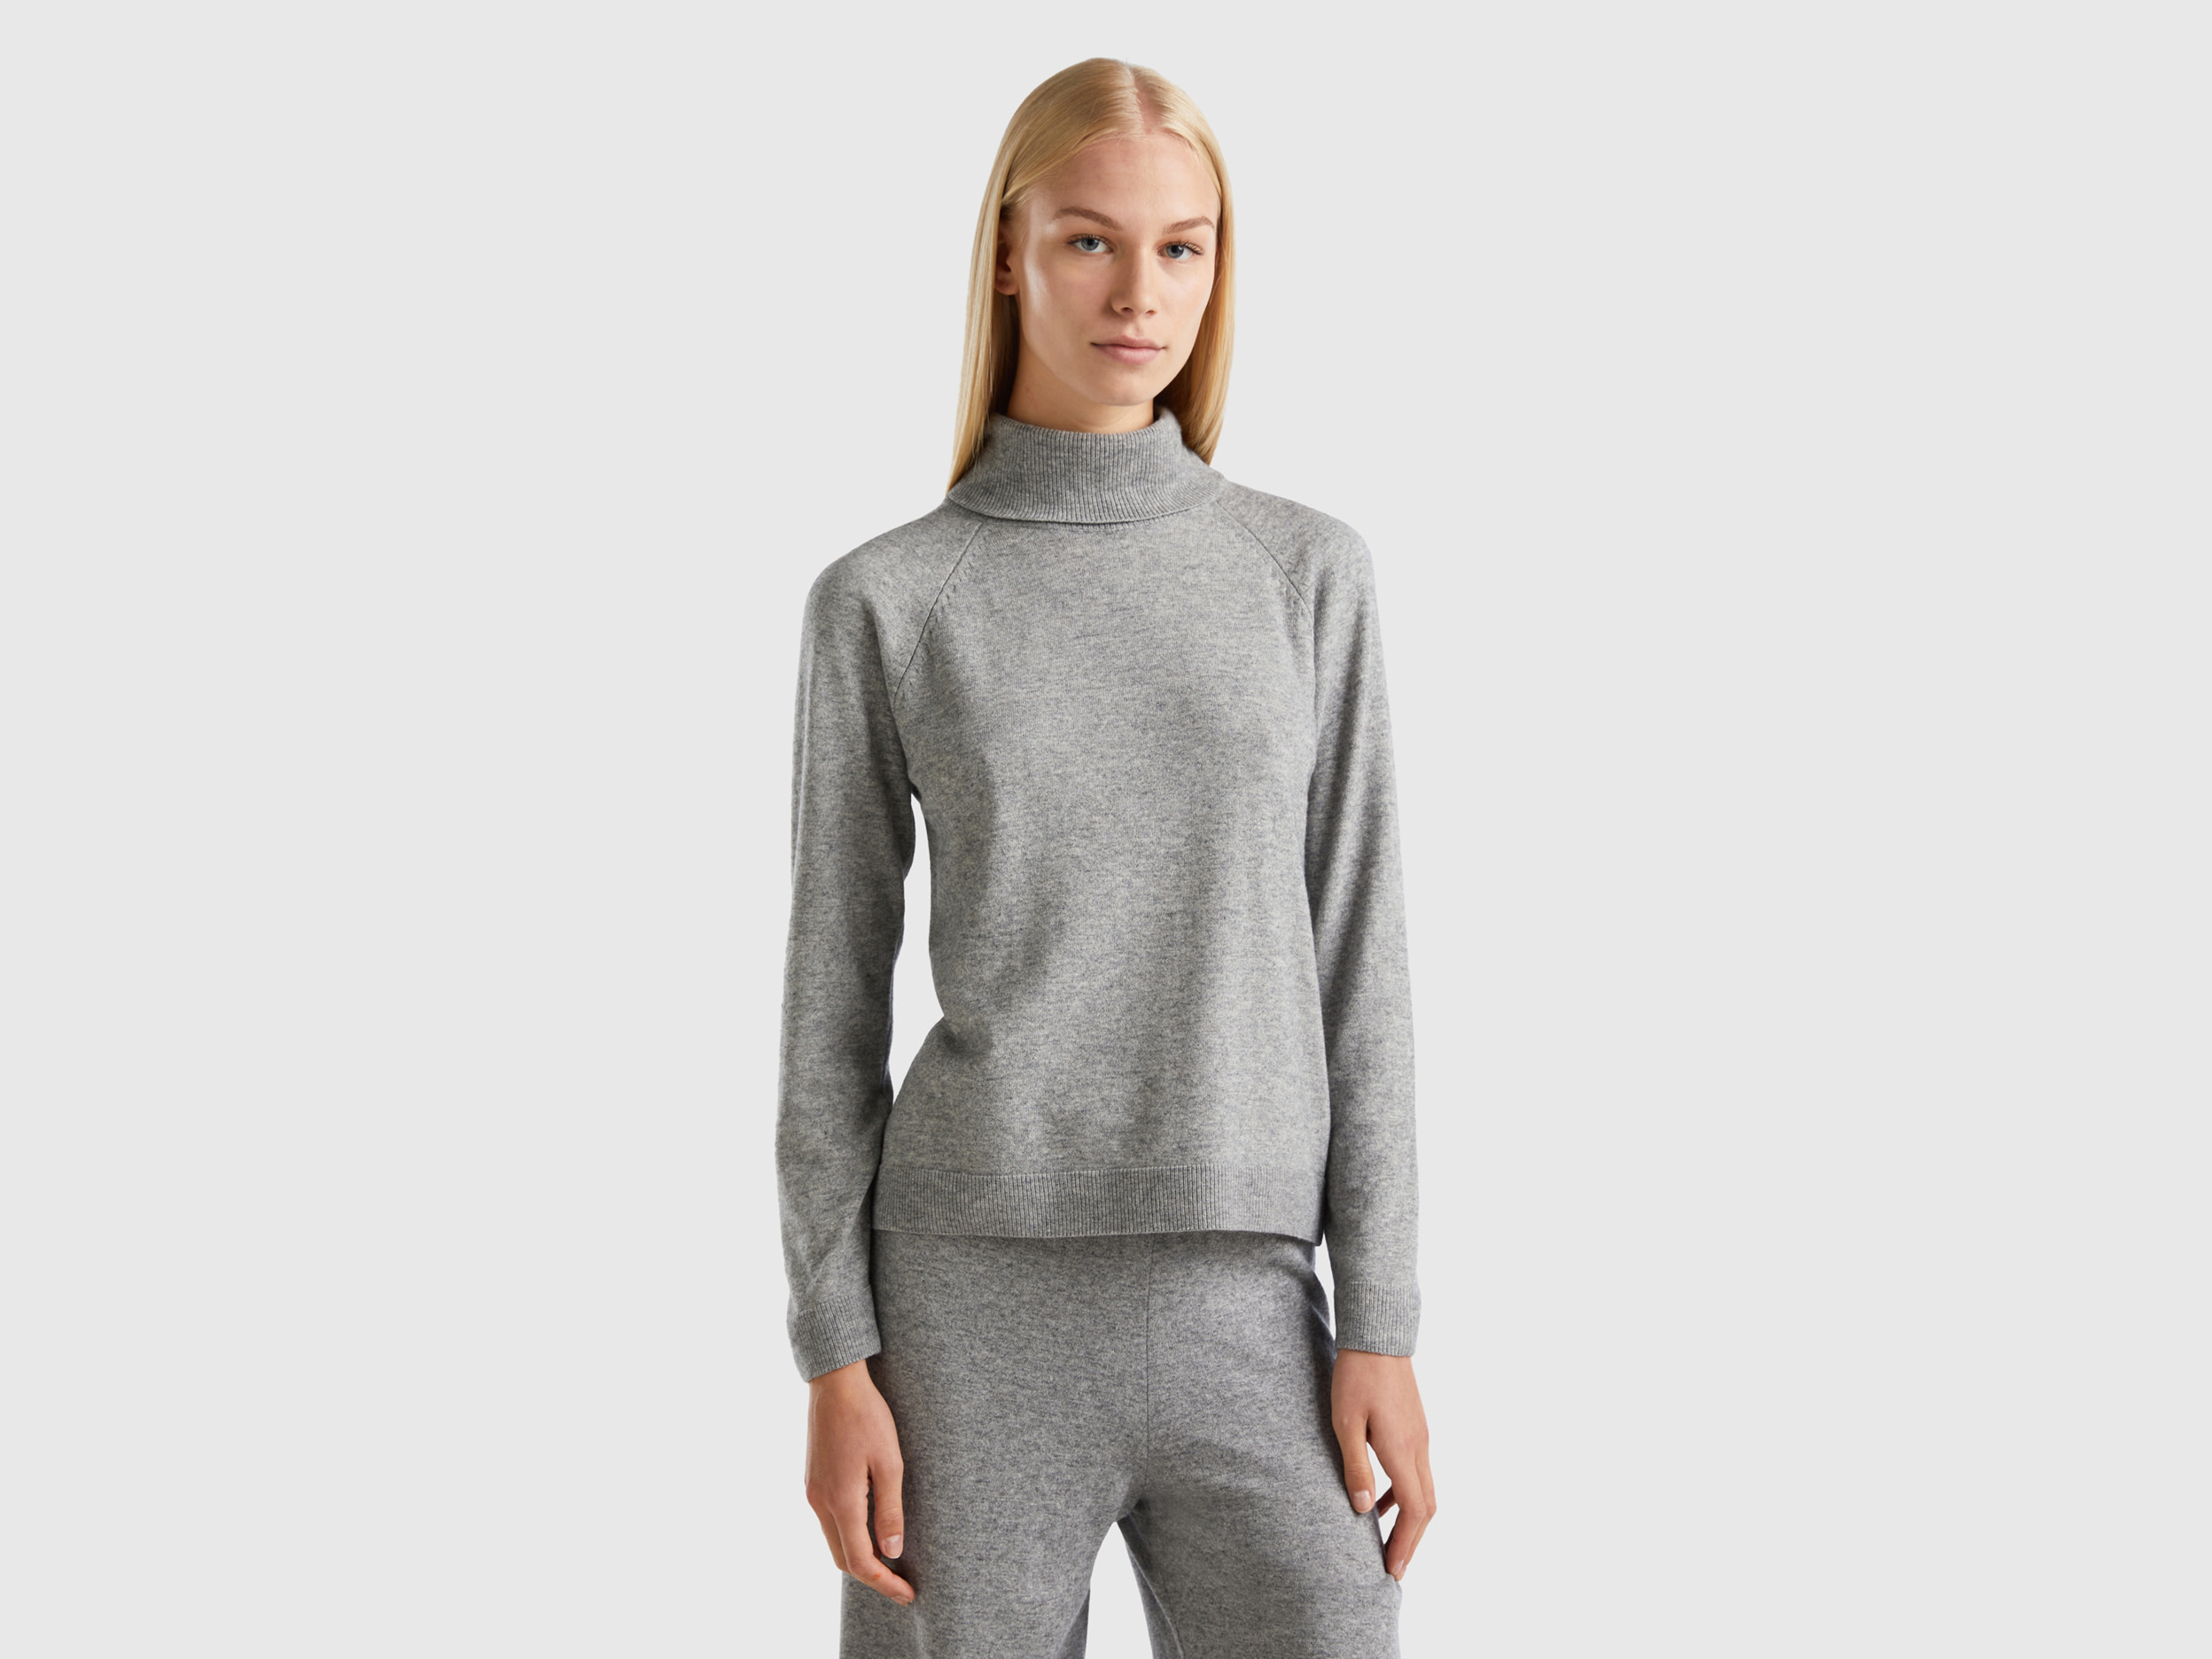 Benetton, Gray Turtleneck Sweater In Cashmere And Wool Blend, size XS, Light Gray, Women